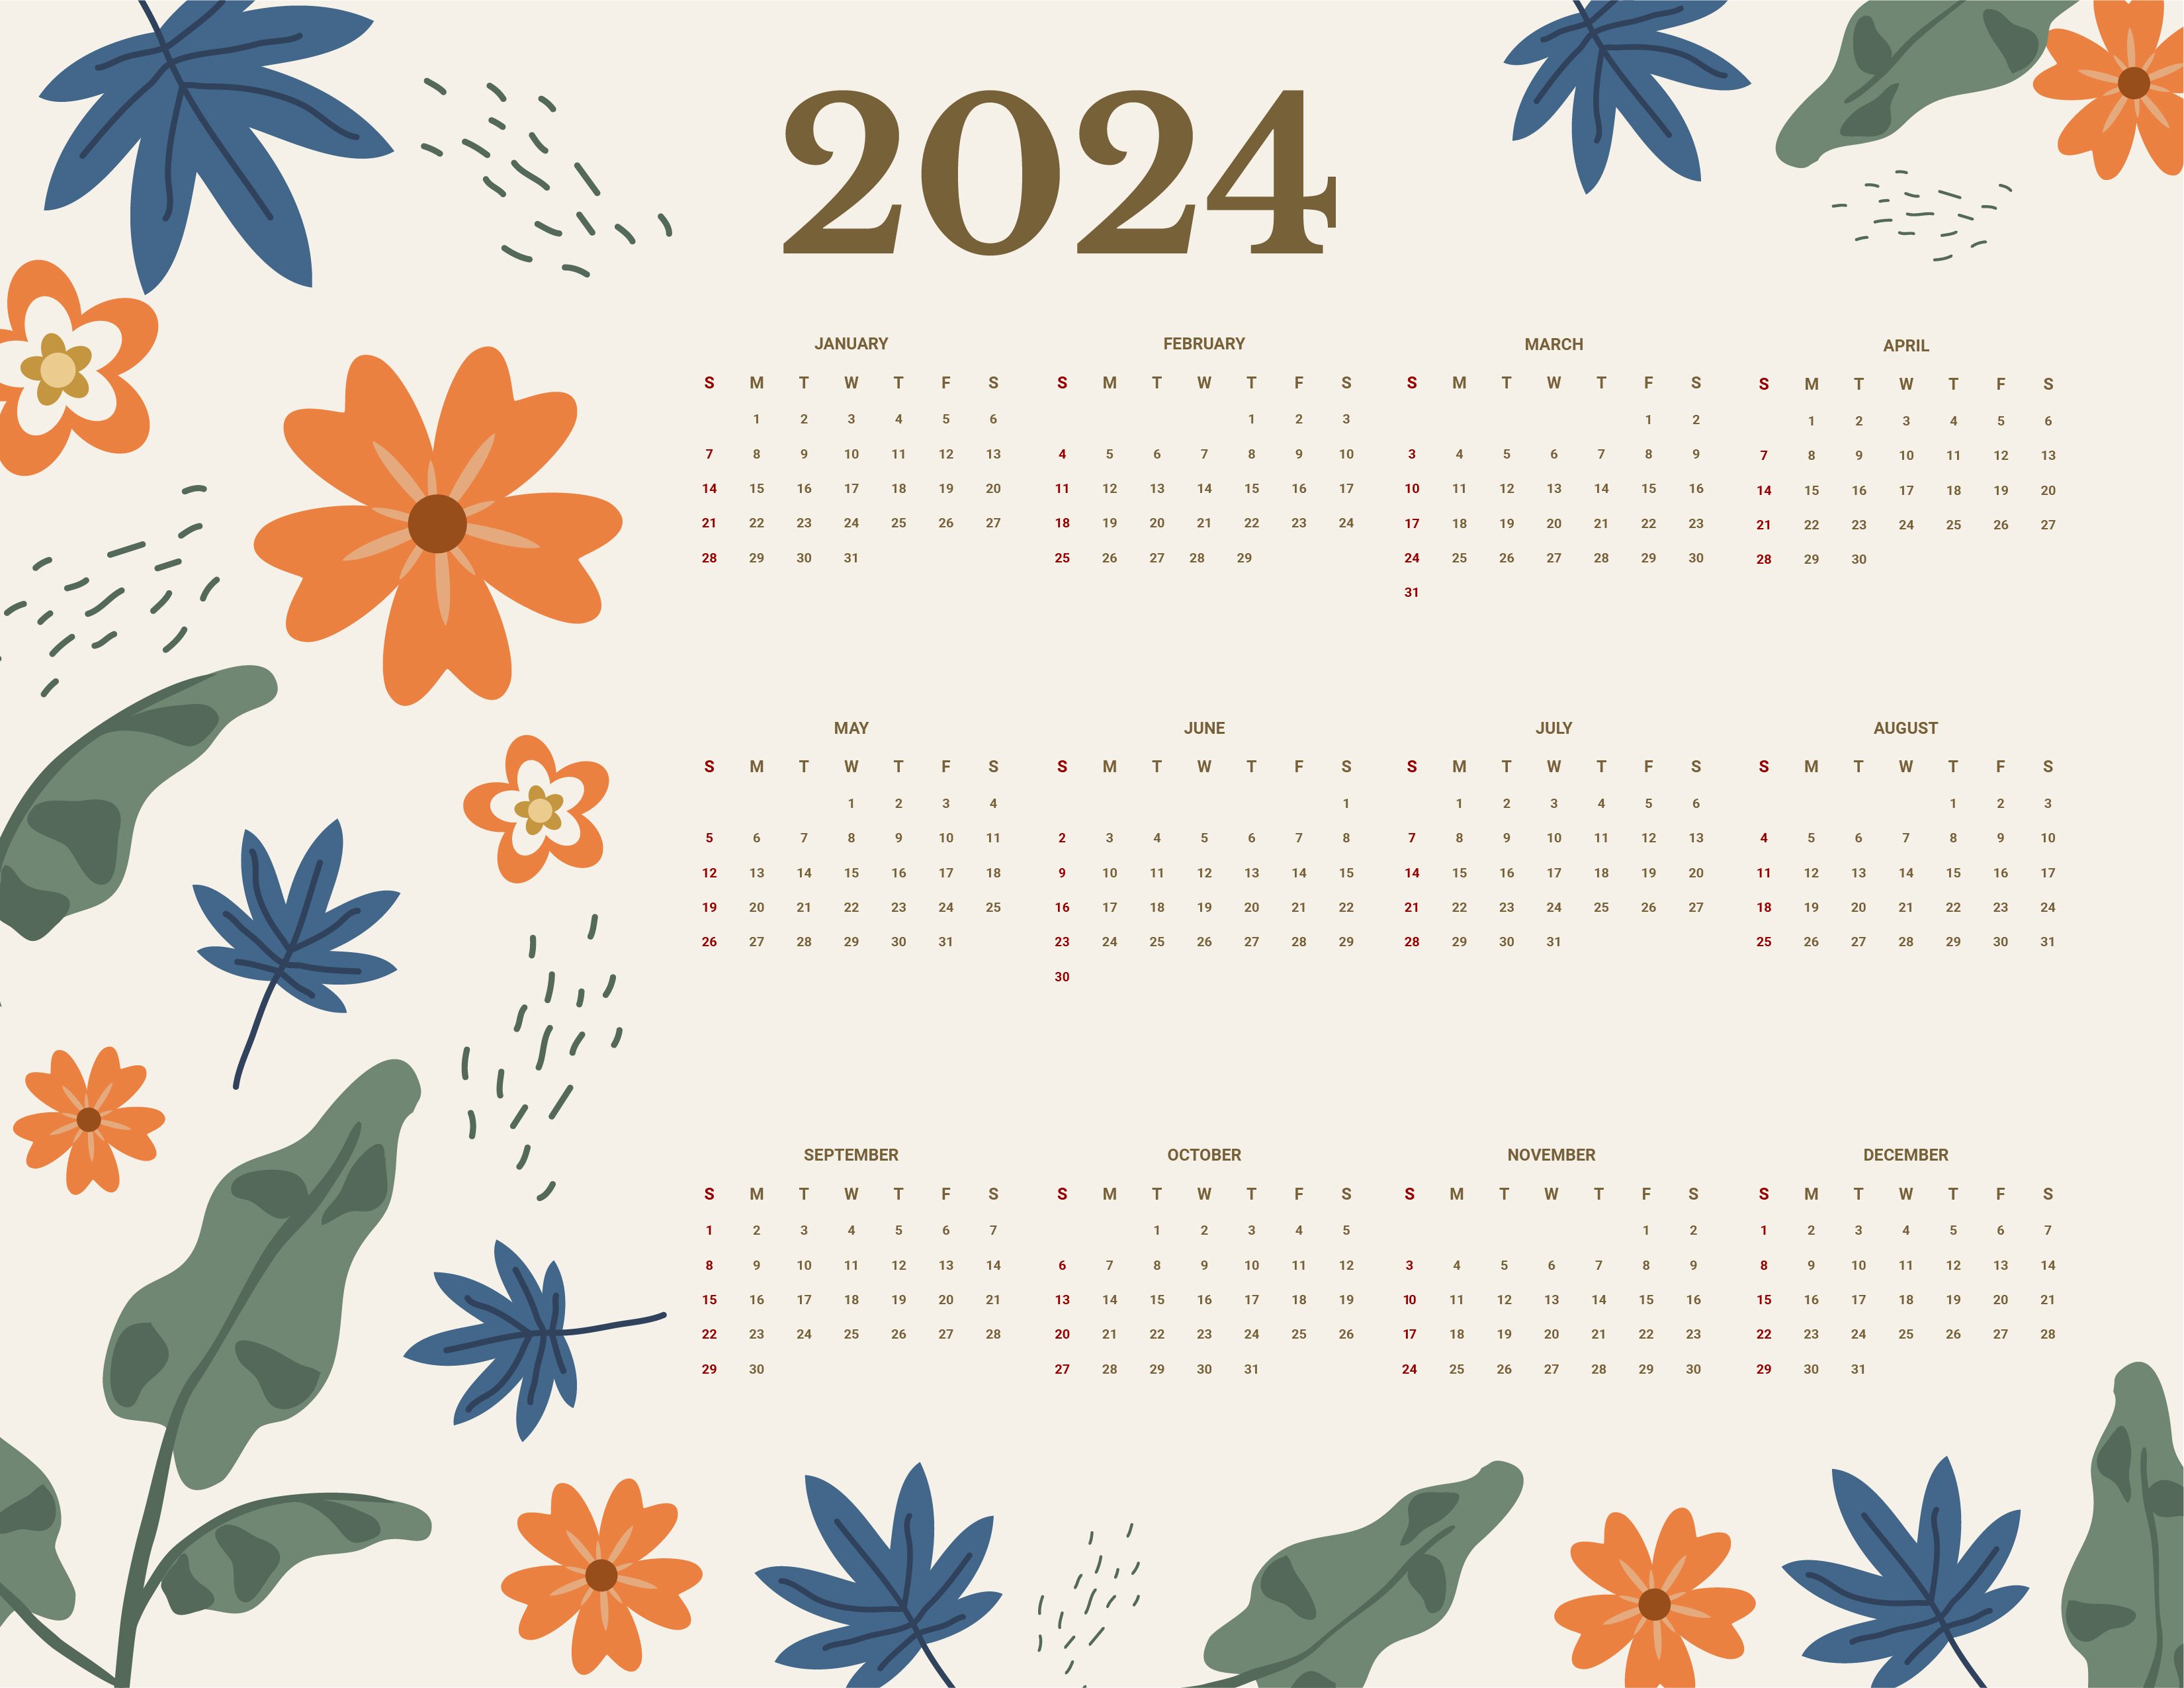 2024 Year Planner Template - Download in Word, PDF, Illustrator ...